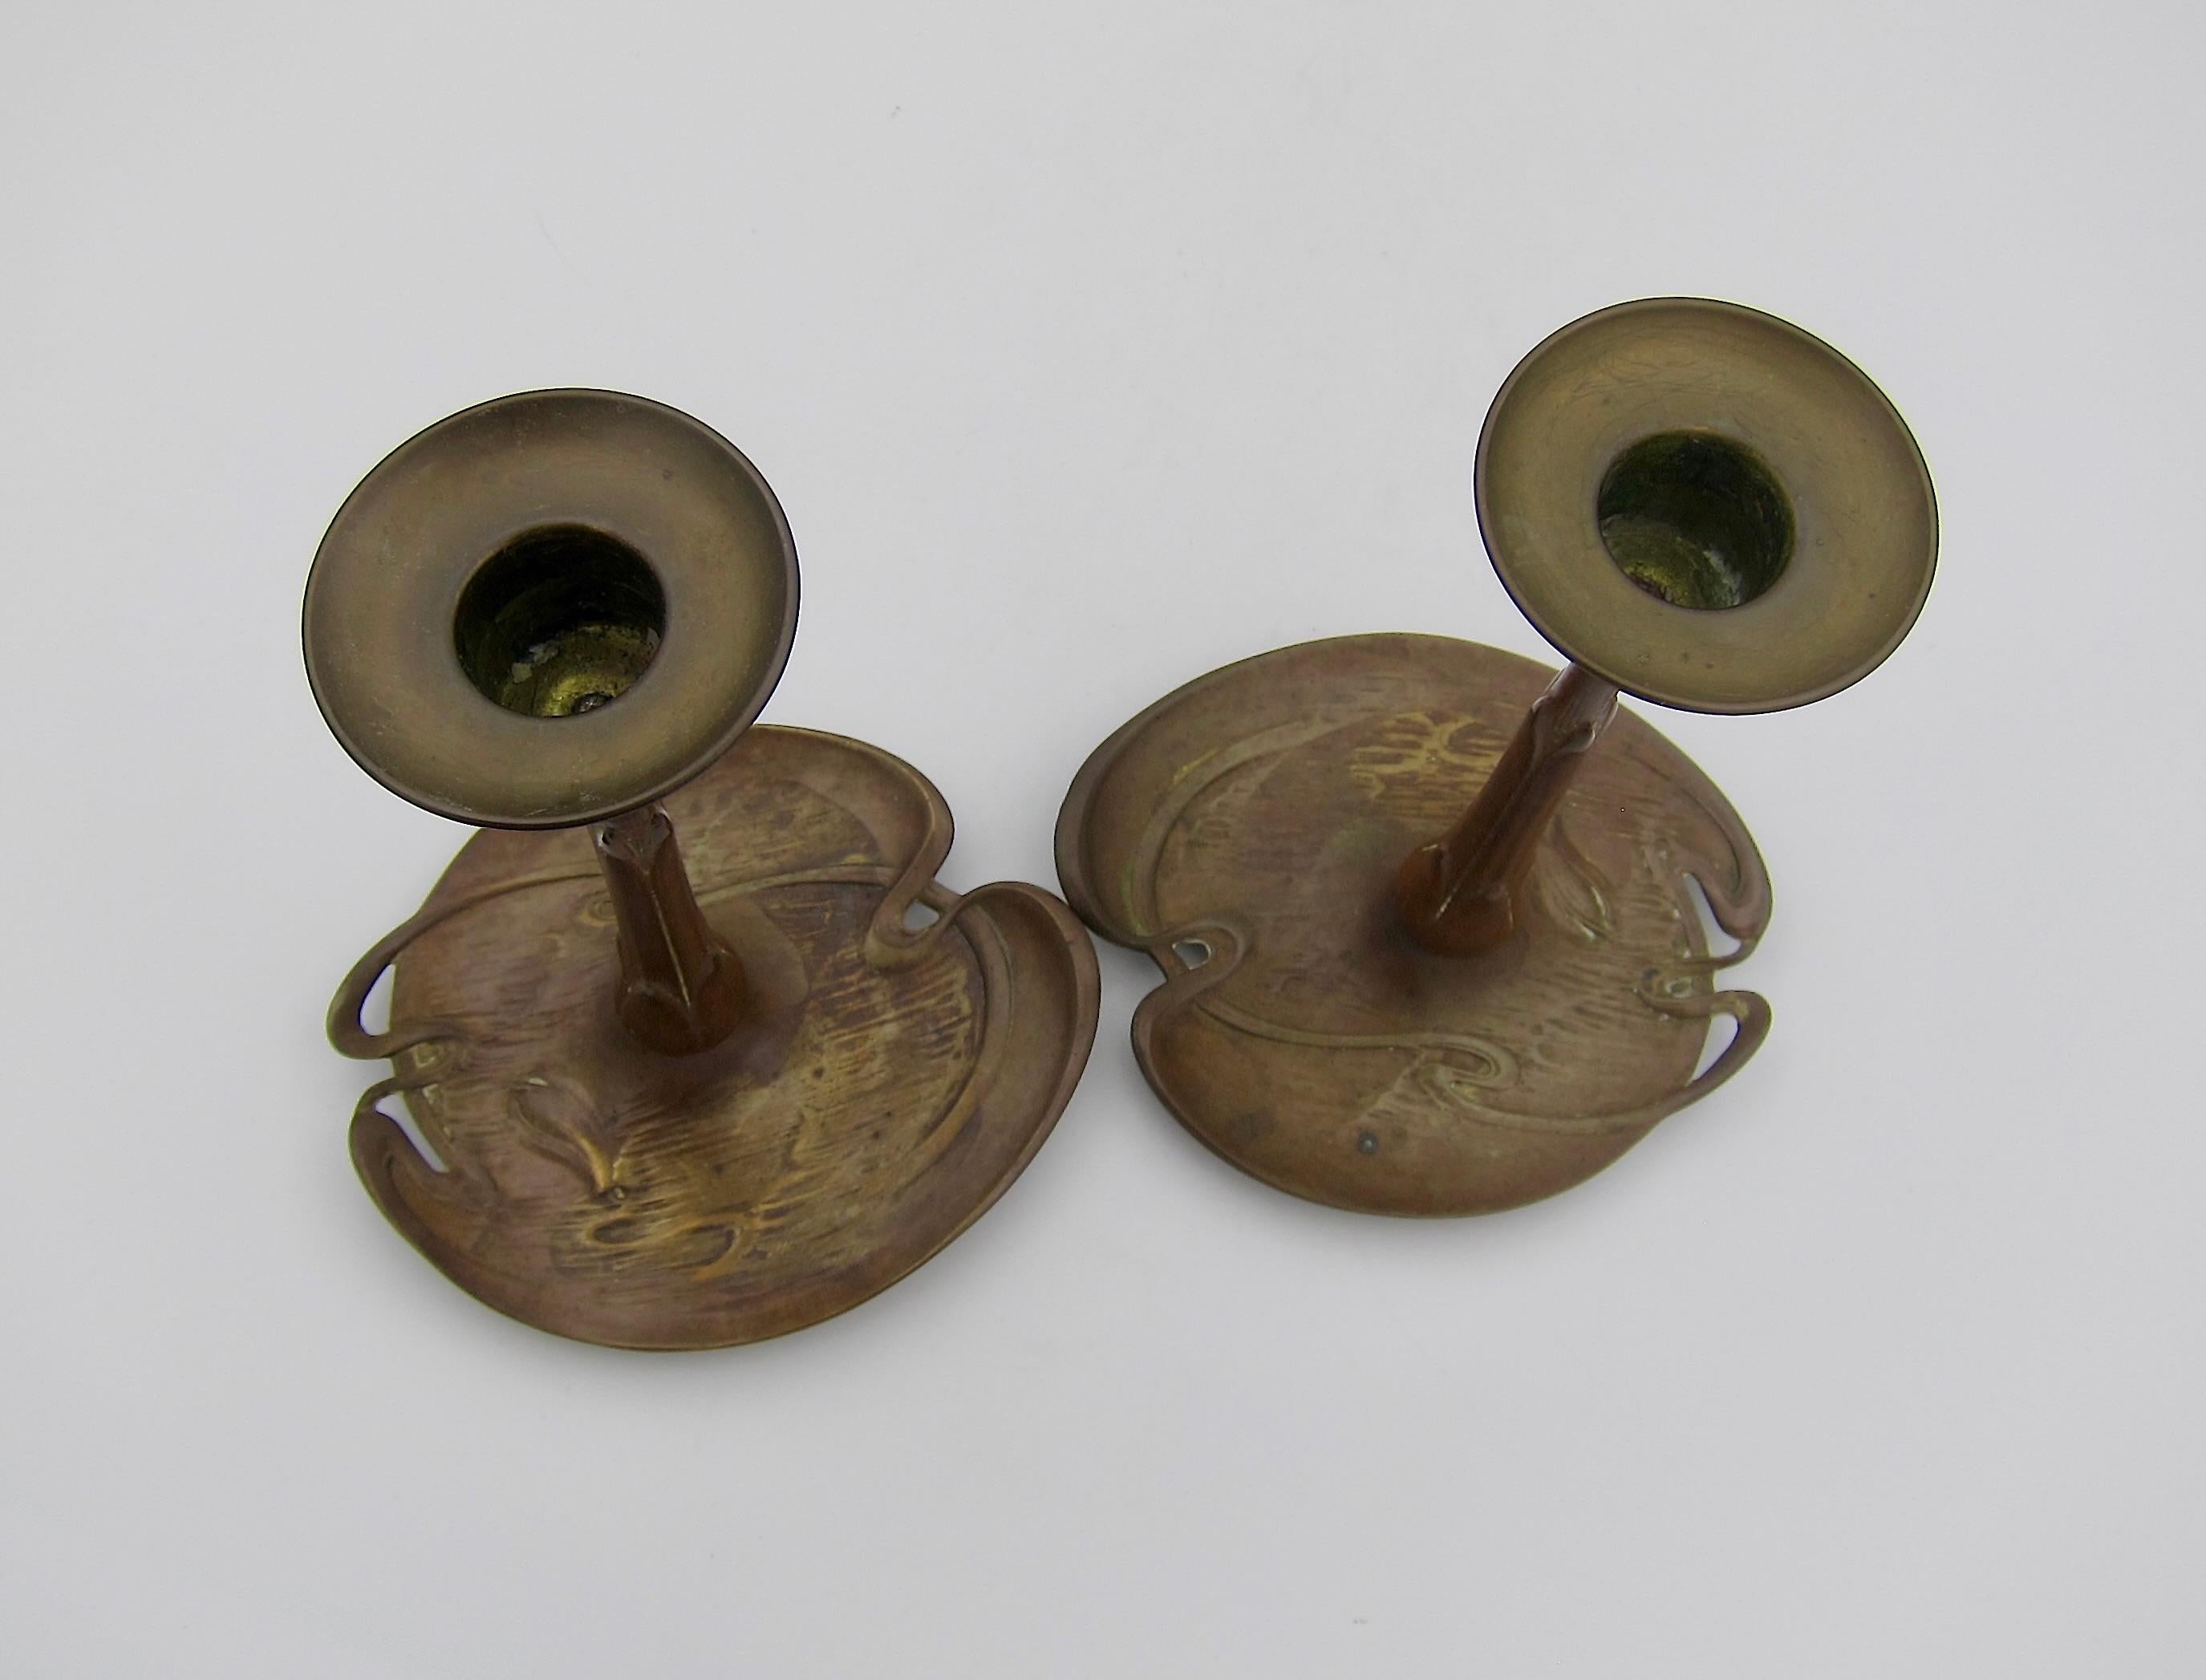 A pair of European art metal candle holders made in Austria or Germany at the turn of the 20th century. The antique base metal of bronze or brass has a rich golden brown patina with hints of red in the finish. Each candlestick was cast to resemble a